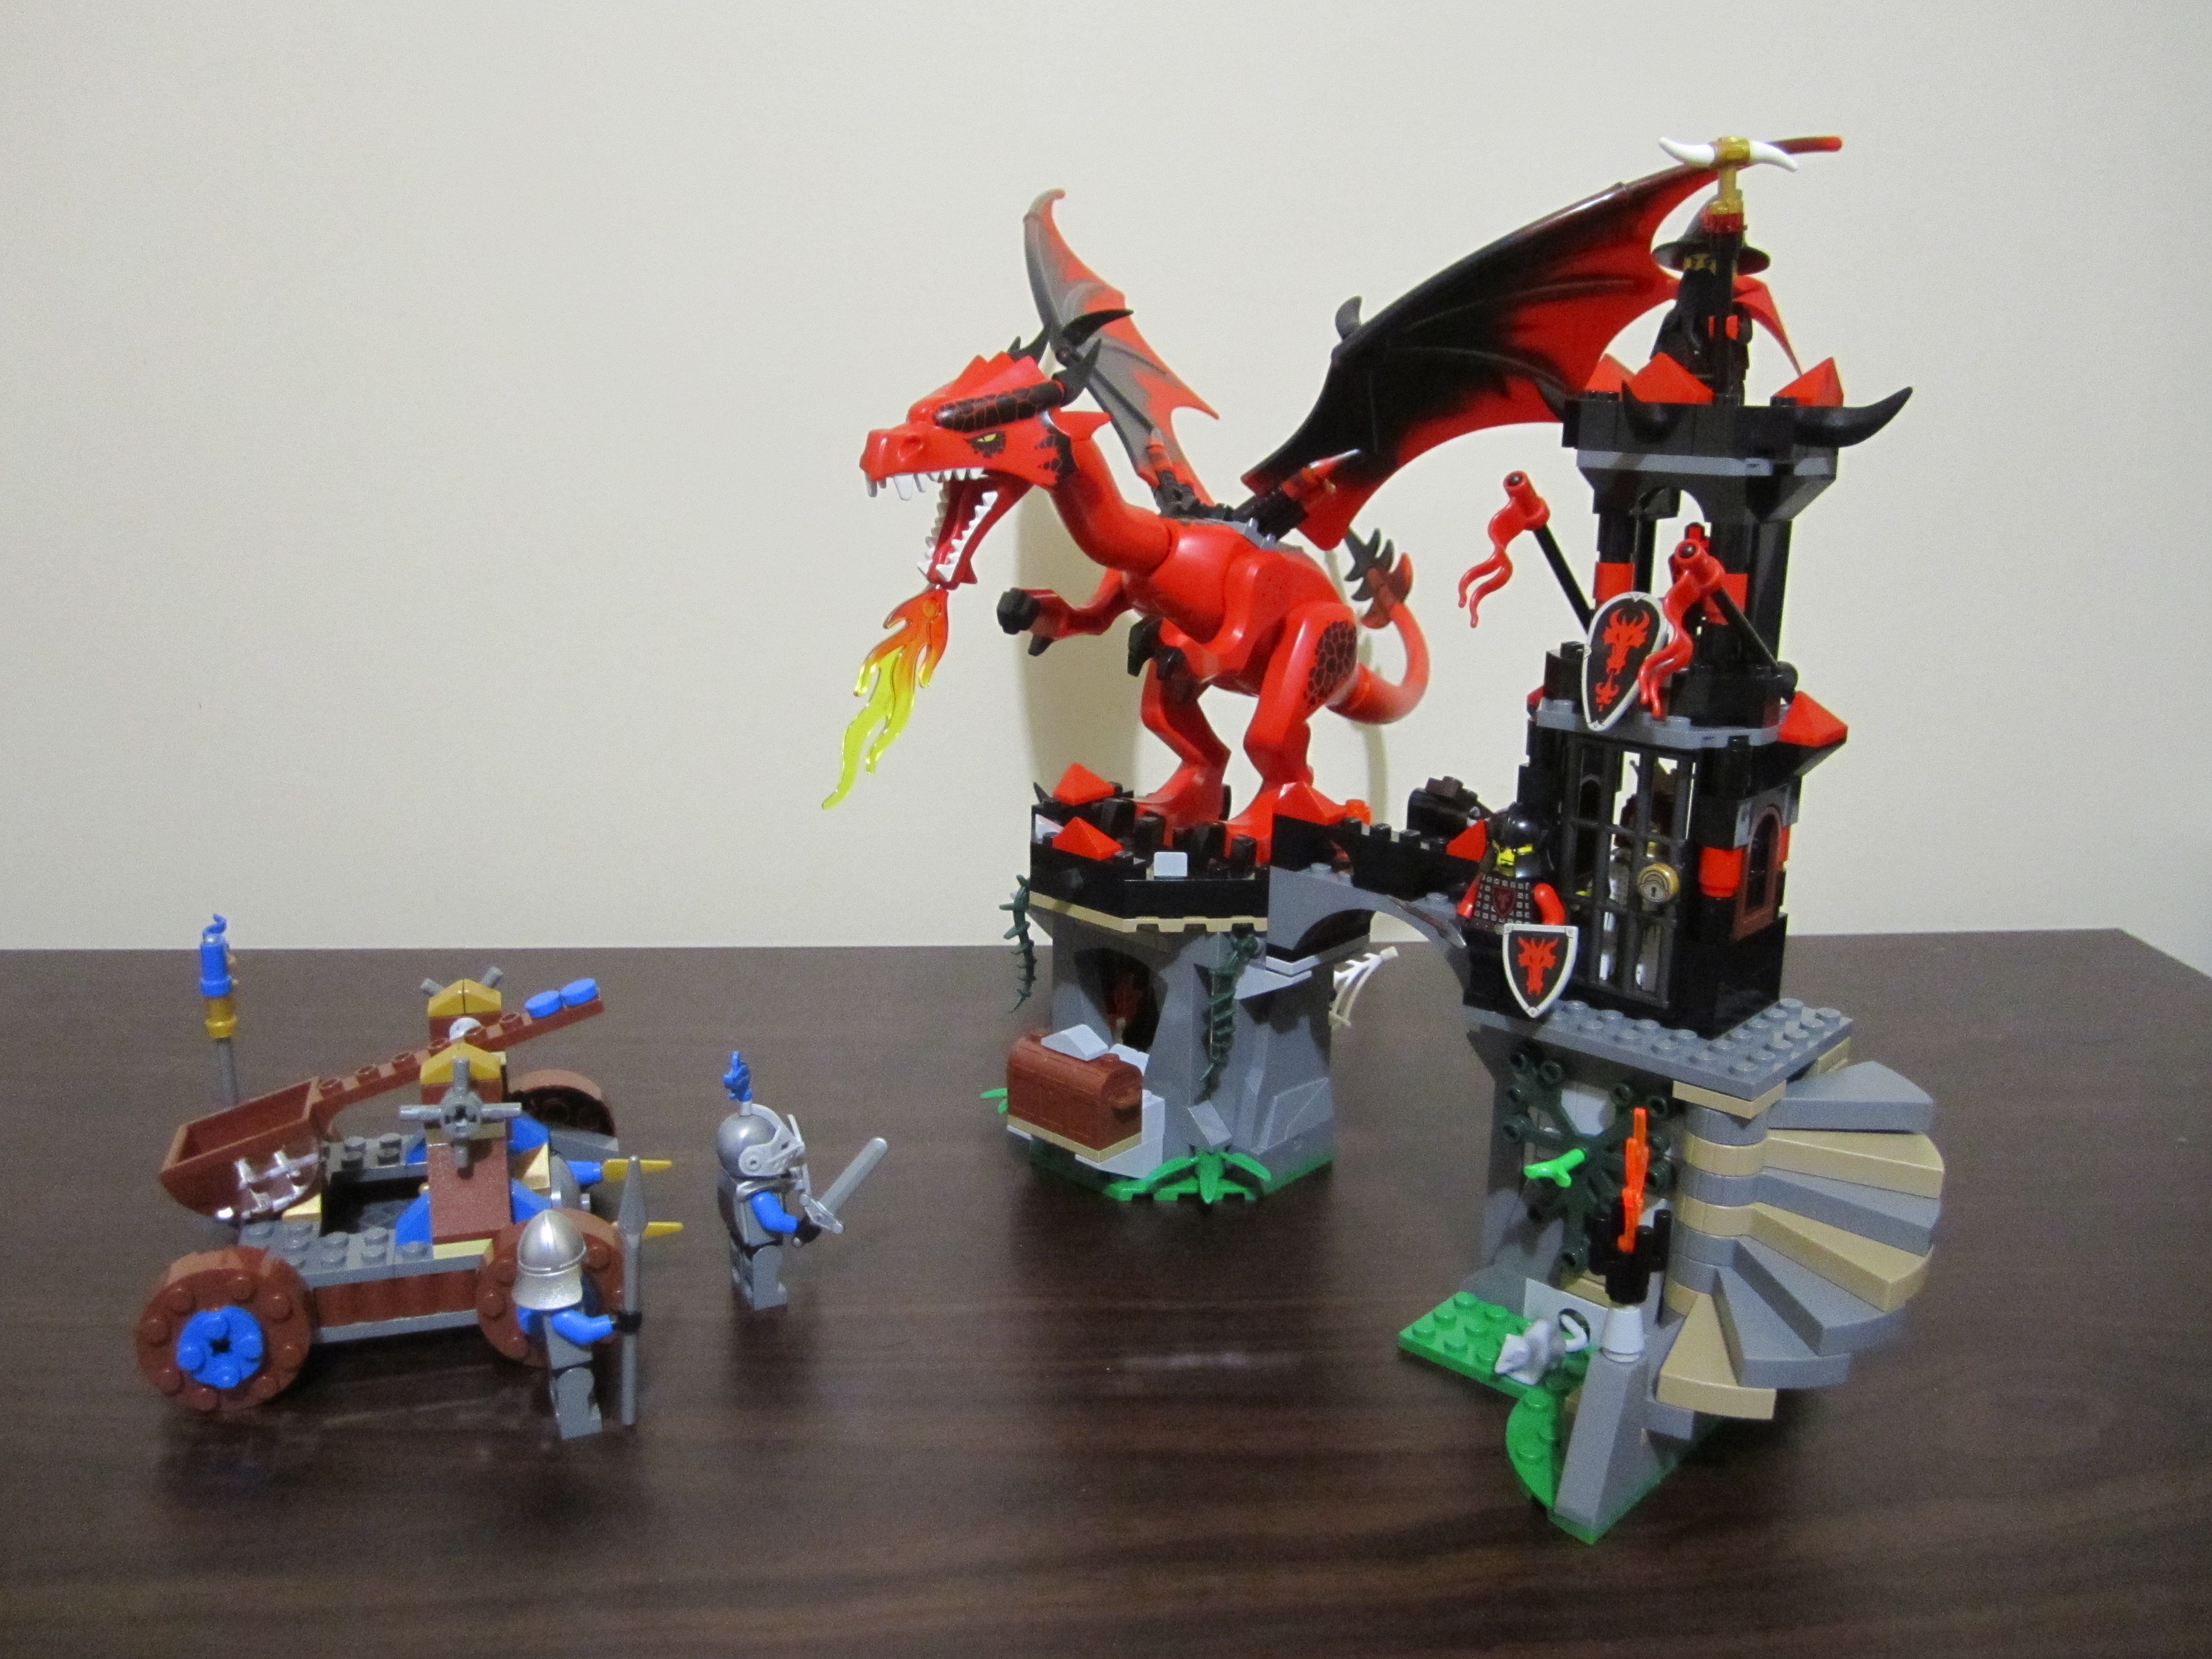 Satire Lappe teenagere Review: Lego 70403 – Dragon Mountain - Jay's Brick Blog